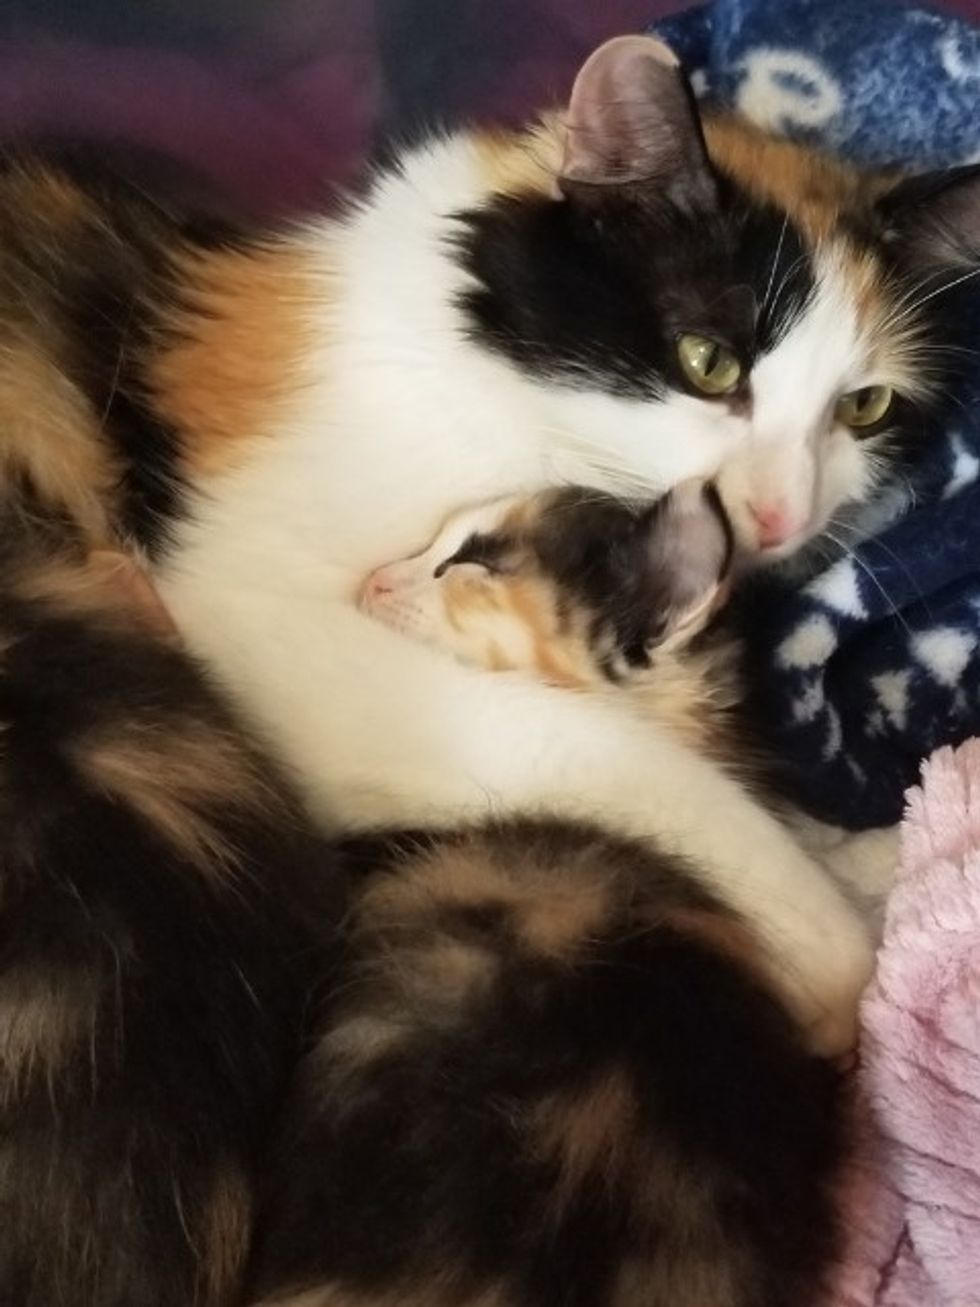 Cat Walked into Woman’s Apartment with a Kitten, Then Came Back with ...